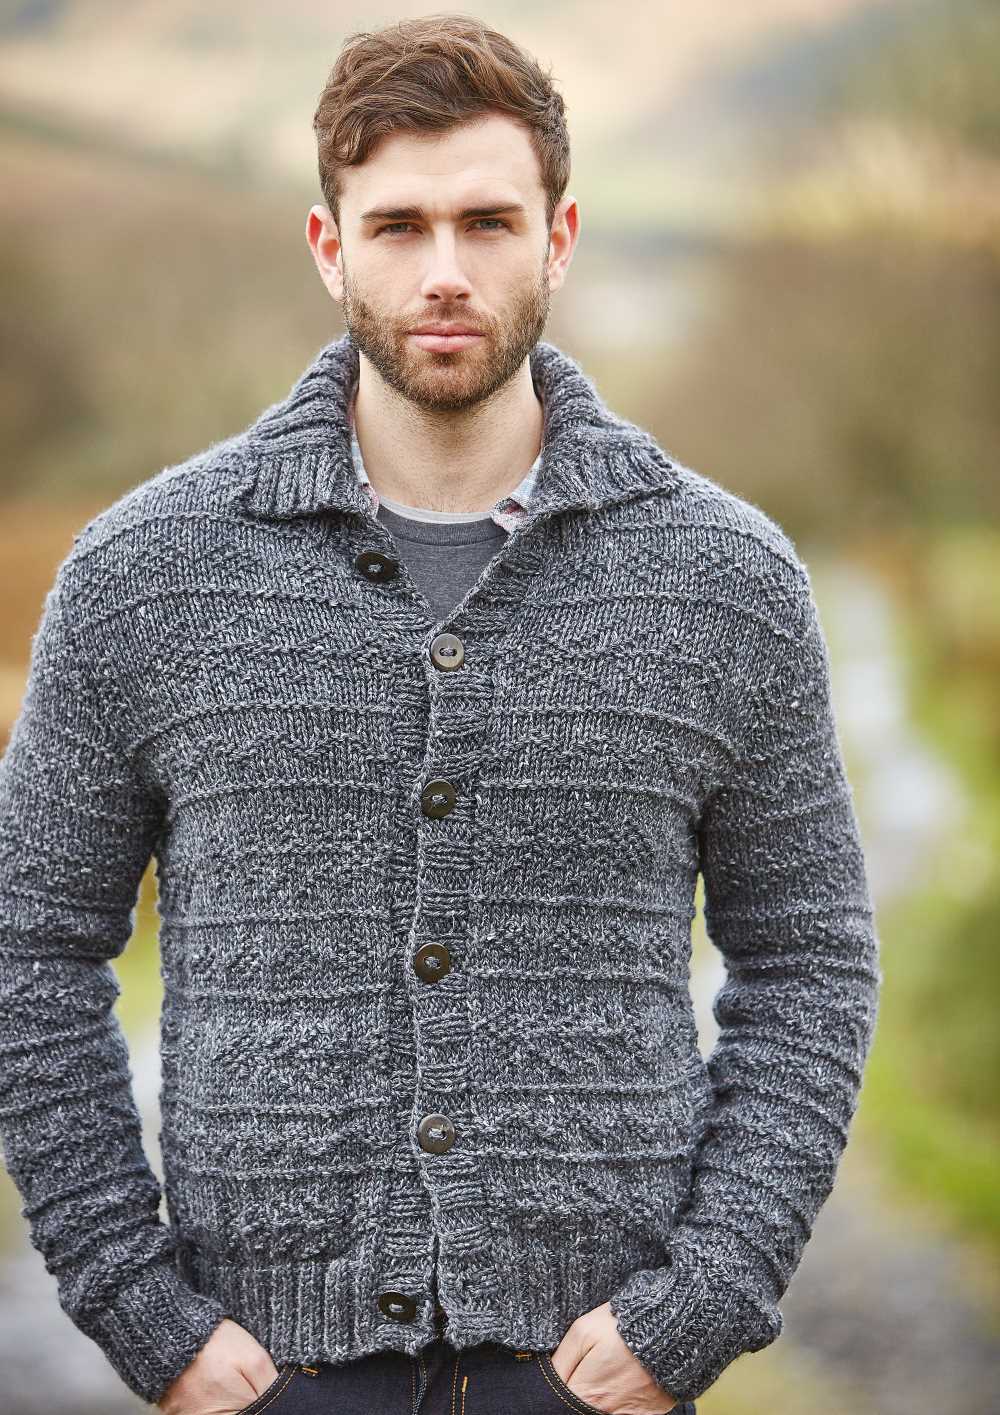 Free Knitting Pattern for a Men's Textured Cardigan Fell